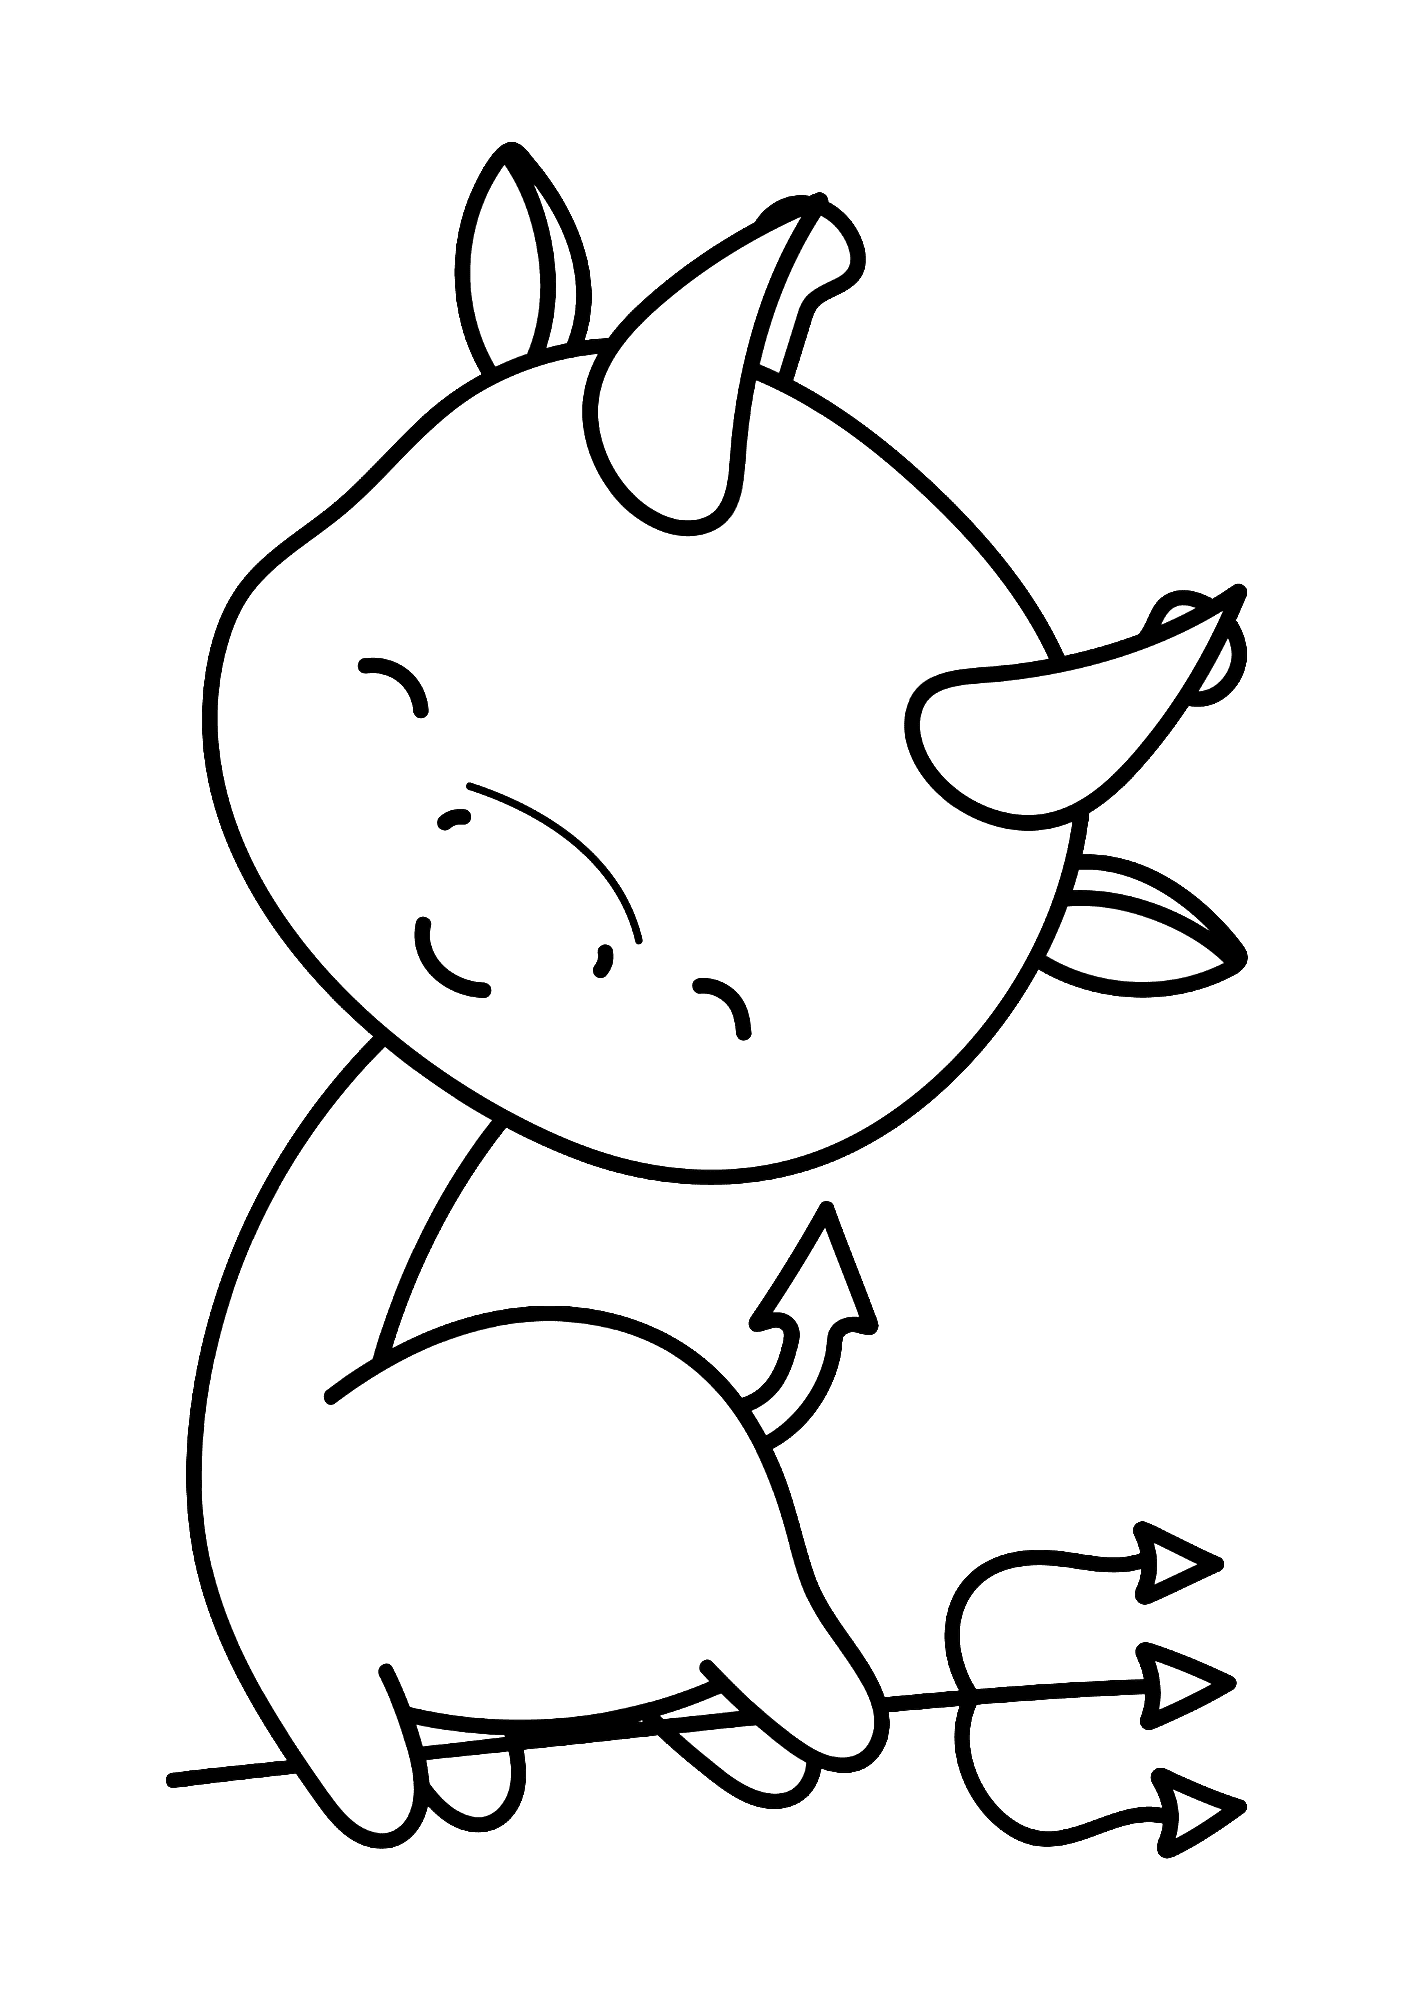 Giraffe Smile Coloring Page For Children